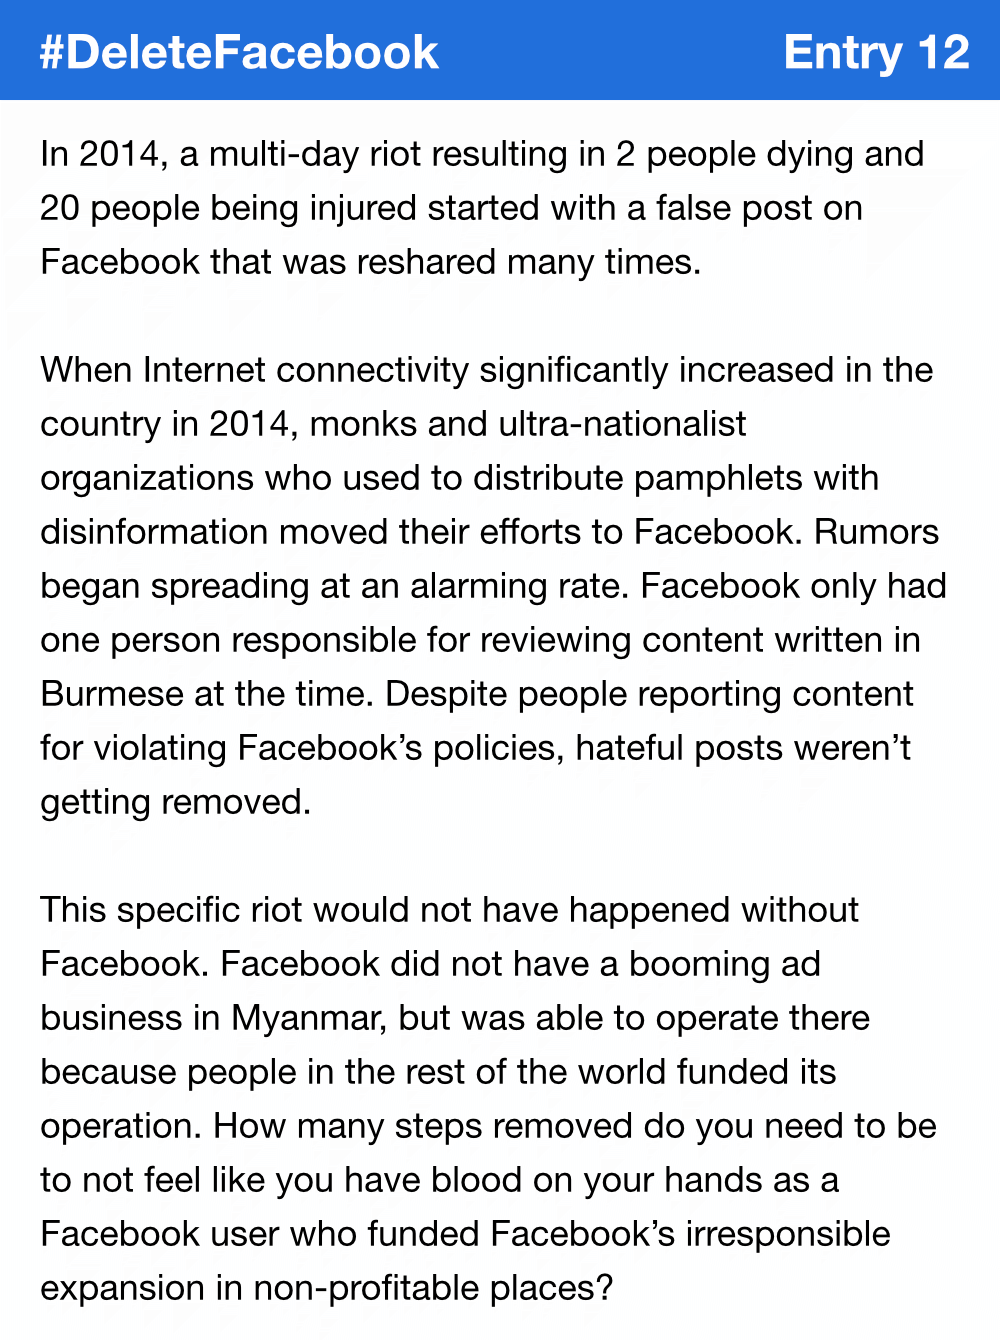 In 2014, a multi-day riot resulting in 2 people dying and 20 people being injured started with a false post on Facebook that was reshared many times. When Internet connectivity significantly increased in the country in 2014, monks and ultra-nationalist organizations who used to distribute pamphlets with disinformation moved their efforts to Facebook. Rumors began spreading at an alarming rate. Facebook only had one person responsible for reviewing content written in Burmese at the time. Despite people reporting content for violating Facebook’s policies, hateful posts weren’t getting removed. This specific riot would not have happened without Facebook. Facebook did not have a booming ad business in Myanmar, but was able to operate there because people in the rest of the world funded its operation. How many steps removed do you need to be to not feel like you have blood on your hands as a Facebook user who funded Facebook’s irresponsible expansion in non-profitable places?